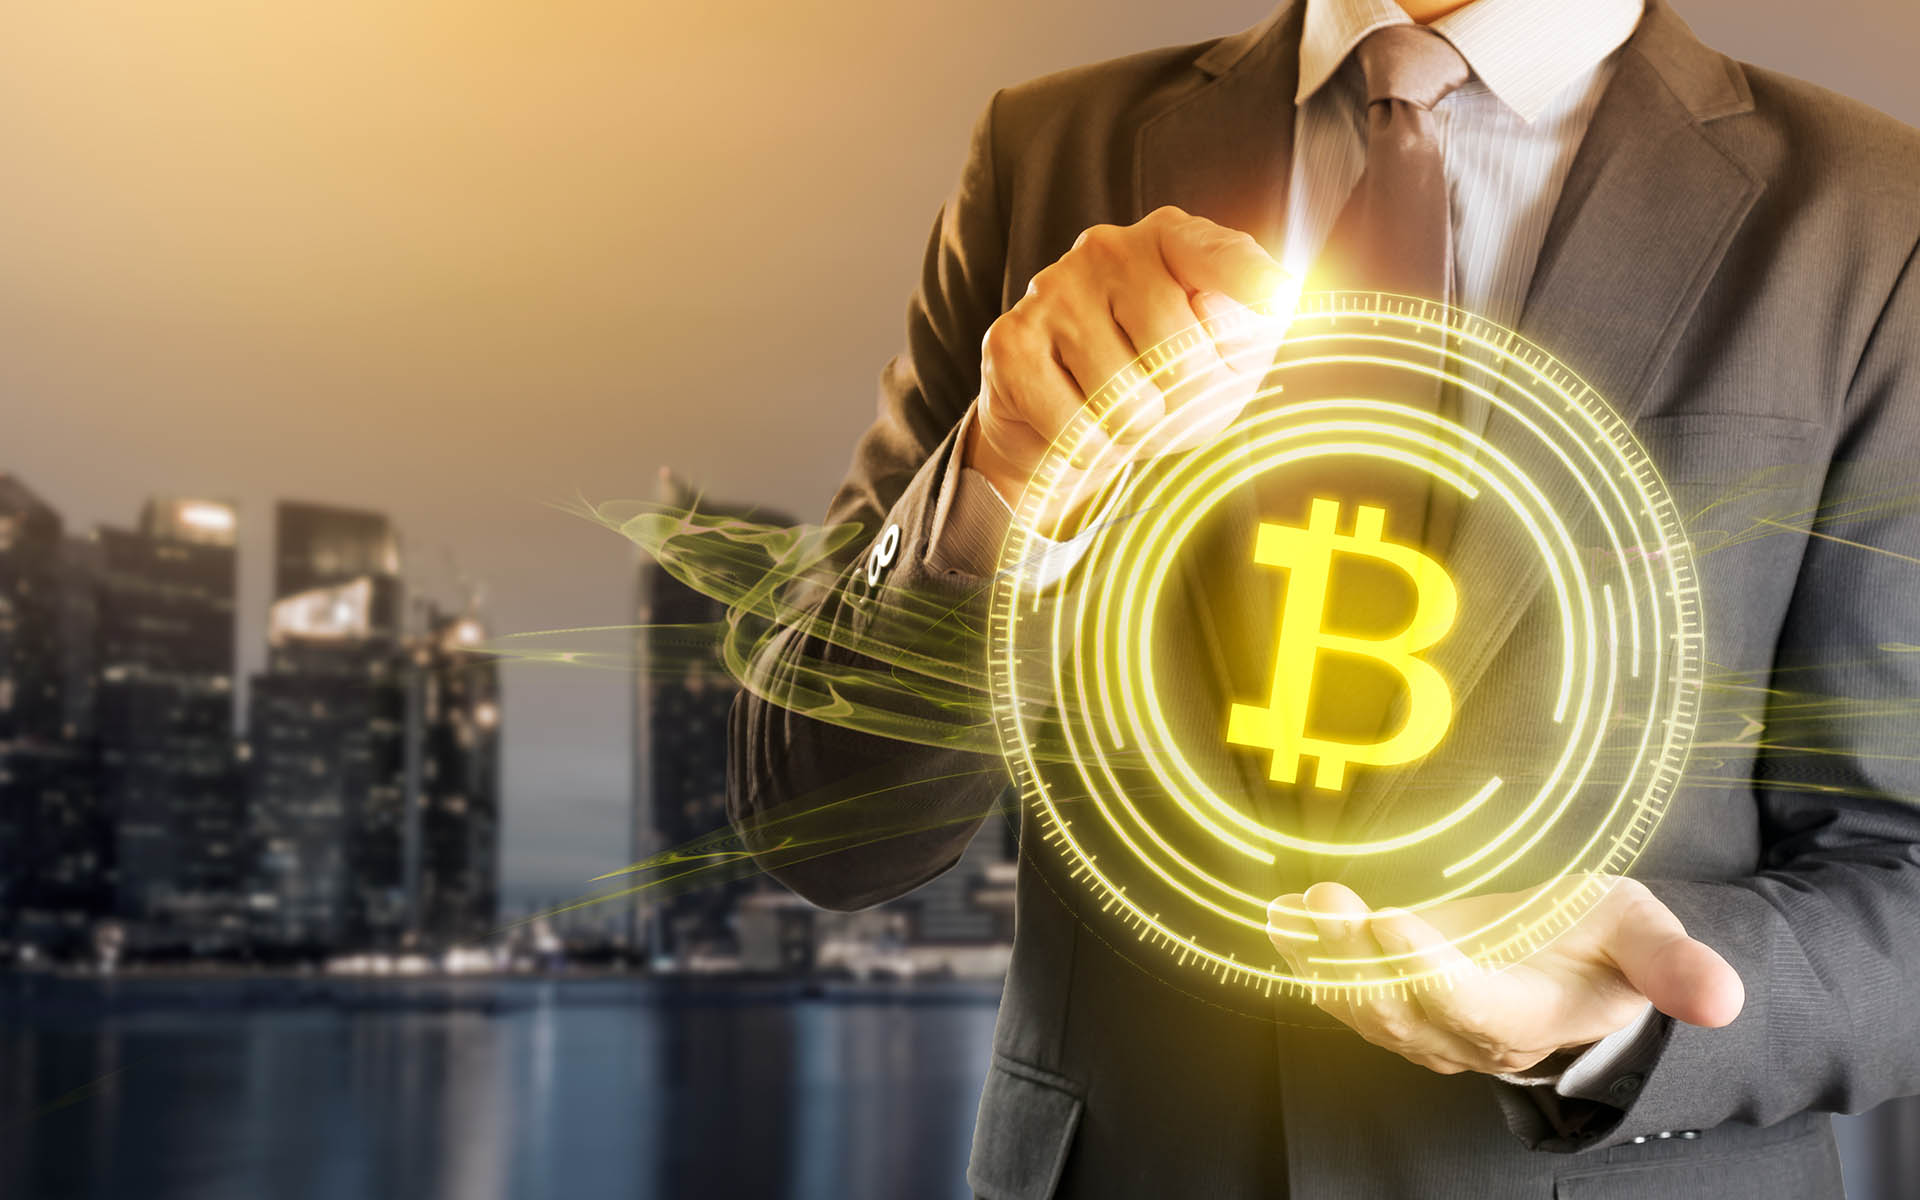 Bitcoin Experts: Forget Price, Look At Investment When Weighing Success